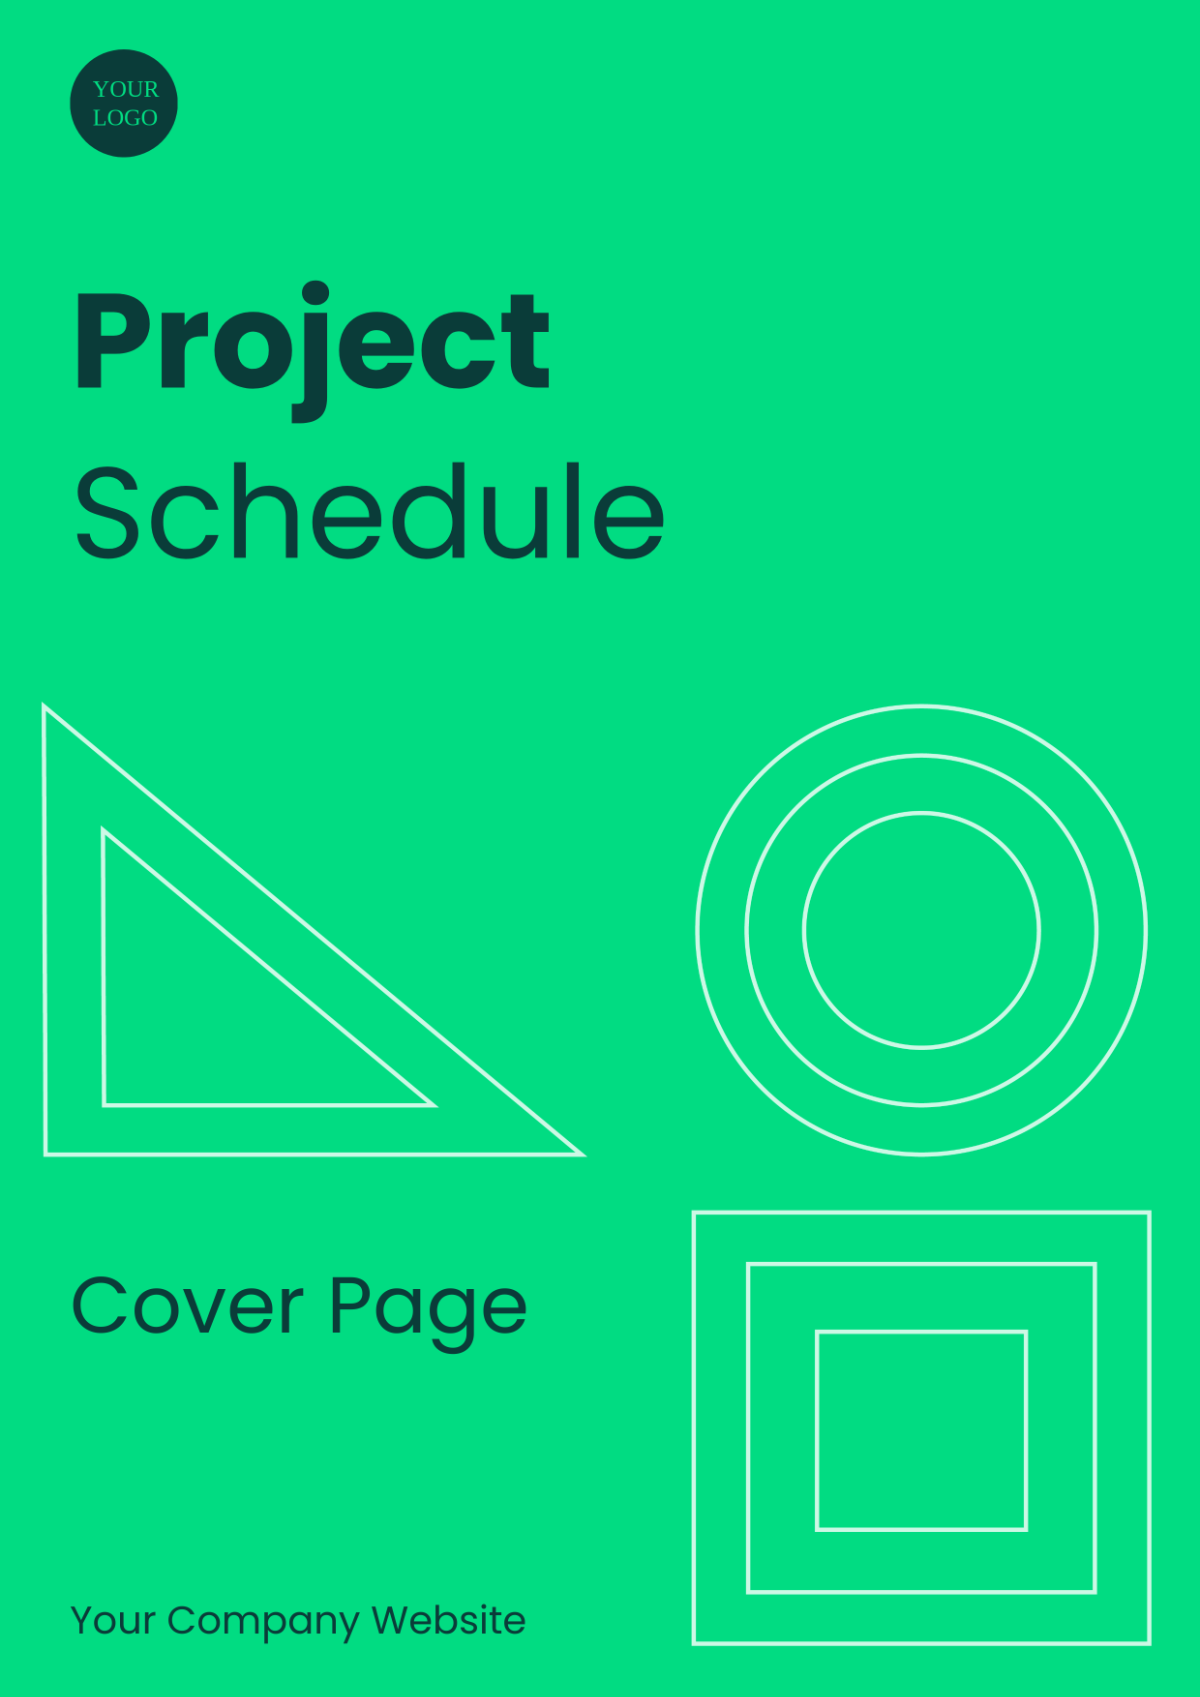 Project Schedule Cover Page